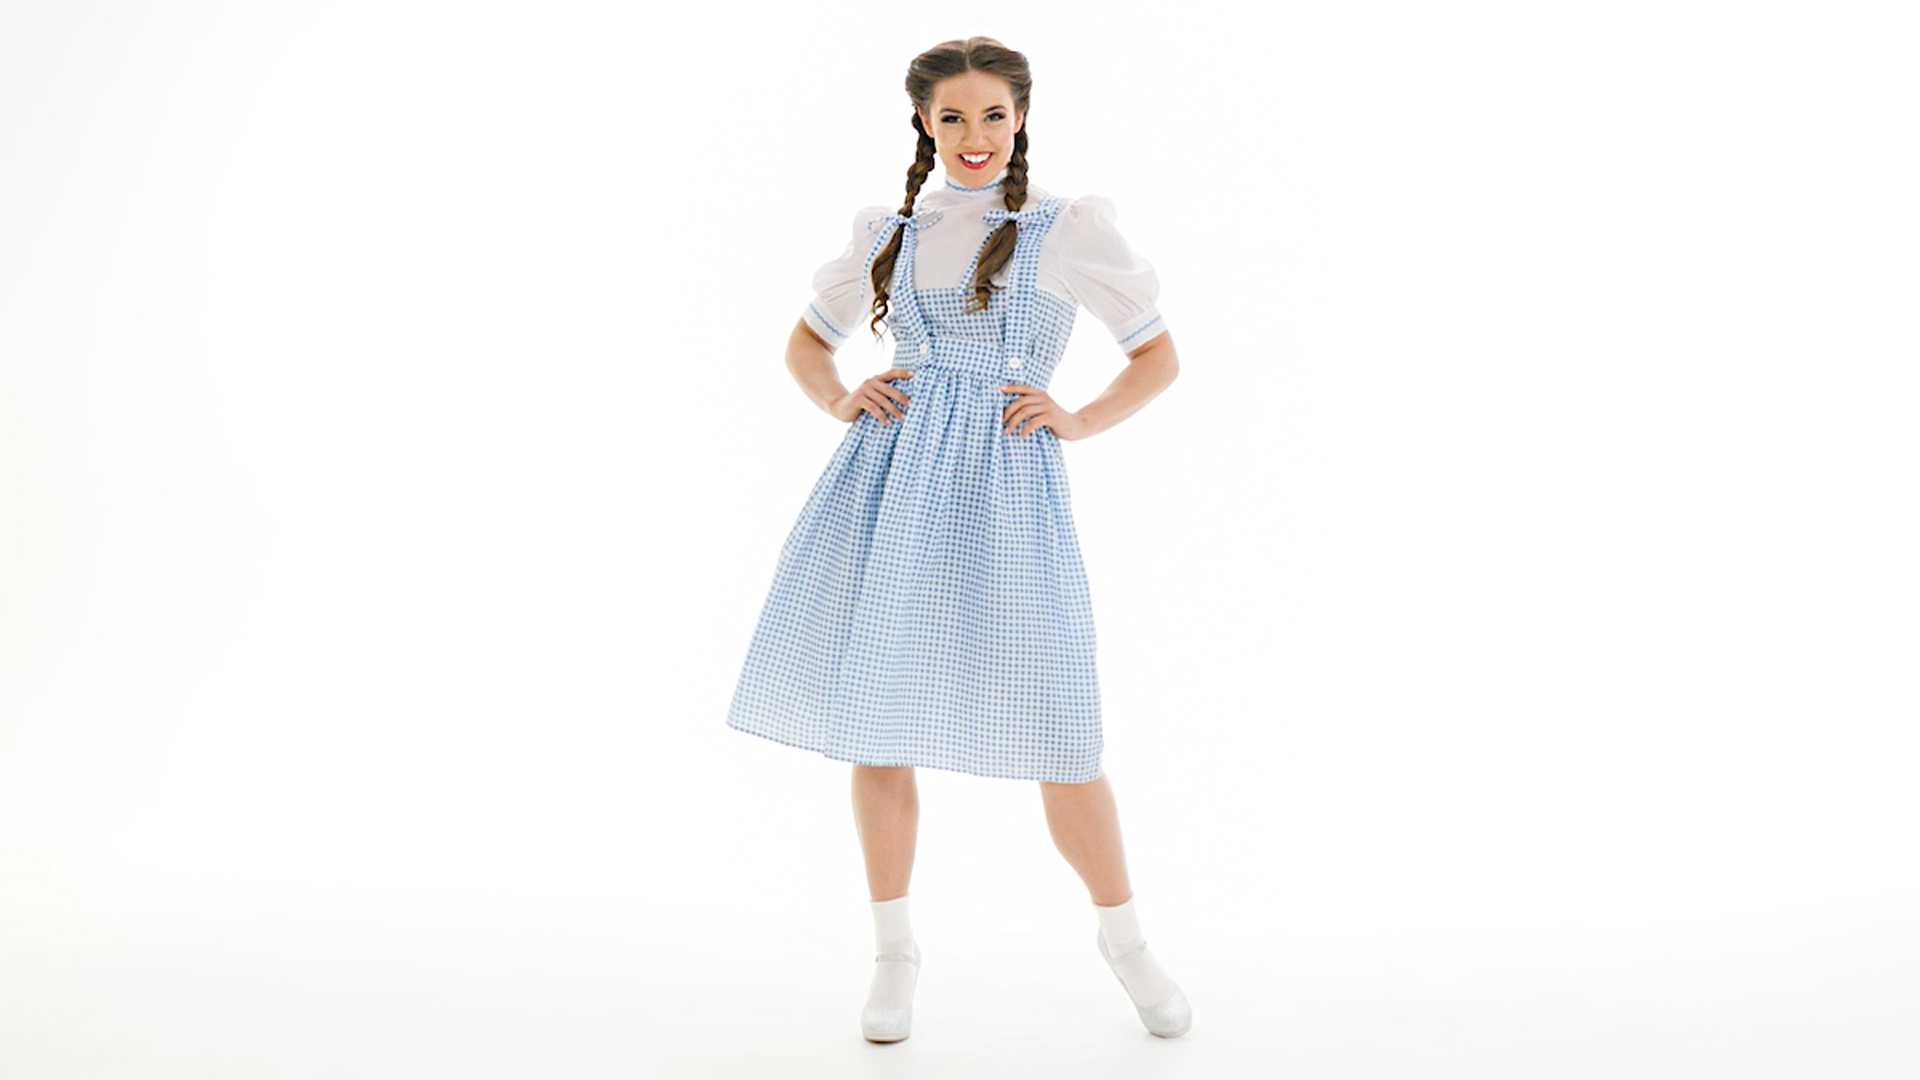 This Kansas Girl long dress costume adds a few more inches to this classic storybook look.